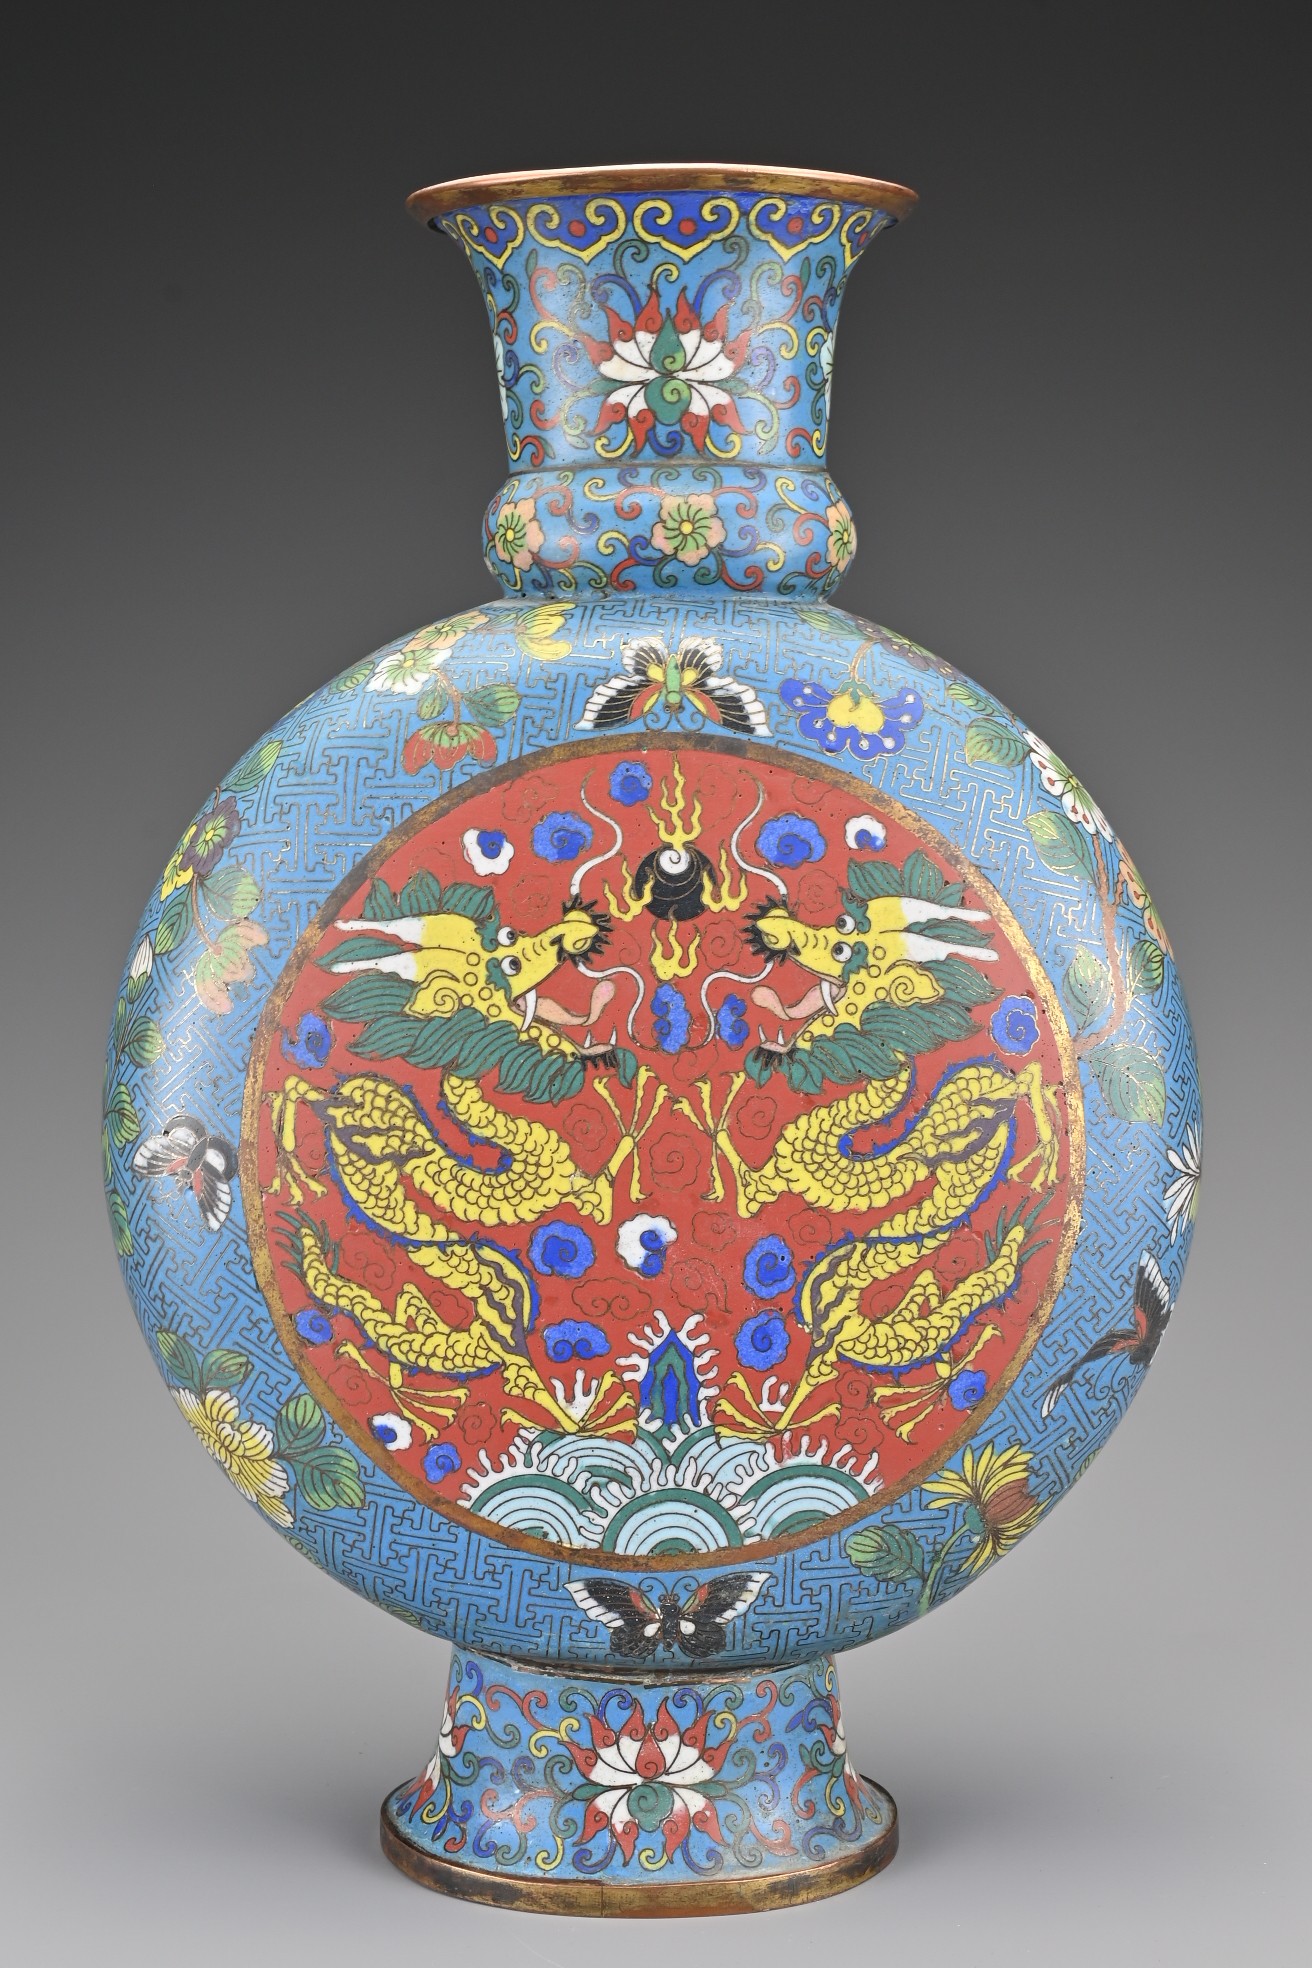 A LARGE CHINESE 19TH CENTURY CLOISONNÉ ENAMEL MOONFLASK, QING DYNASTY. Each face depicting two